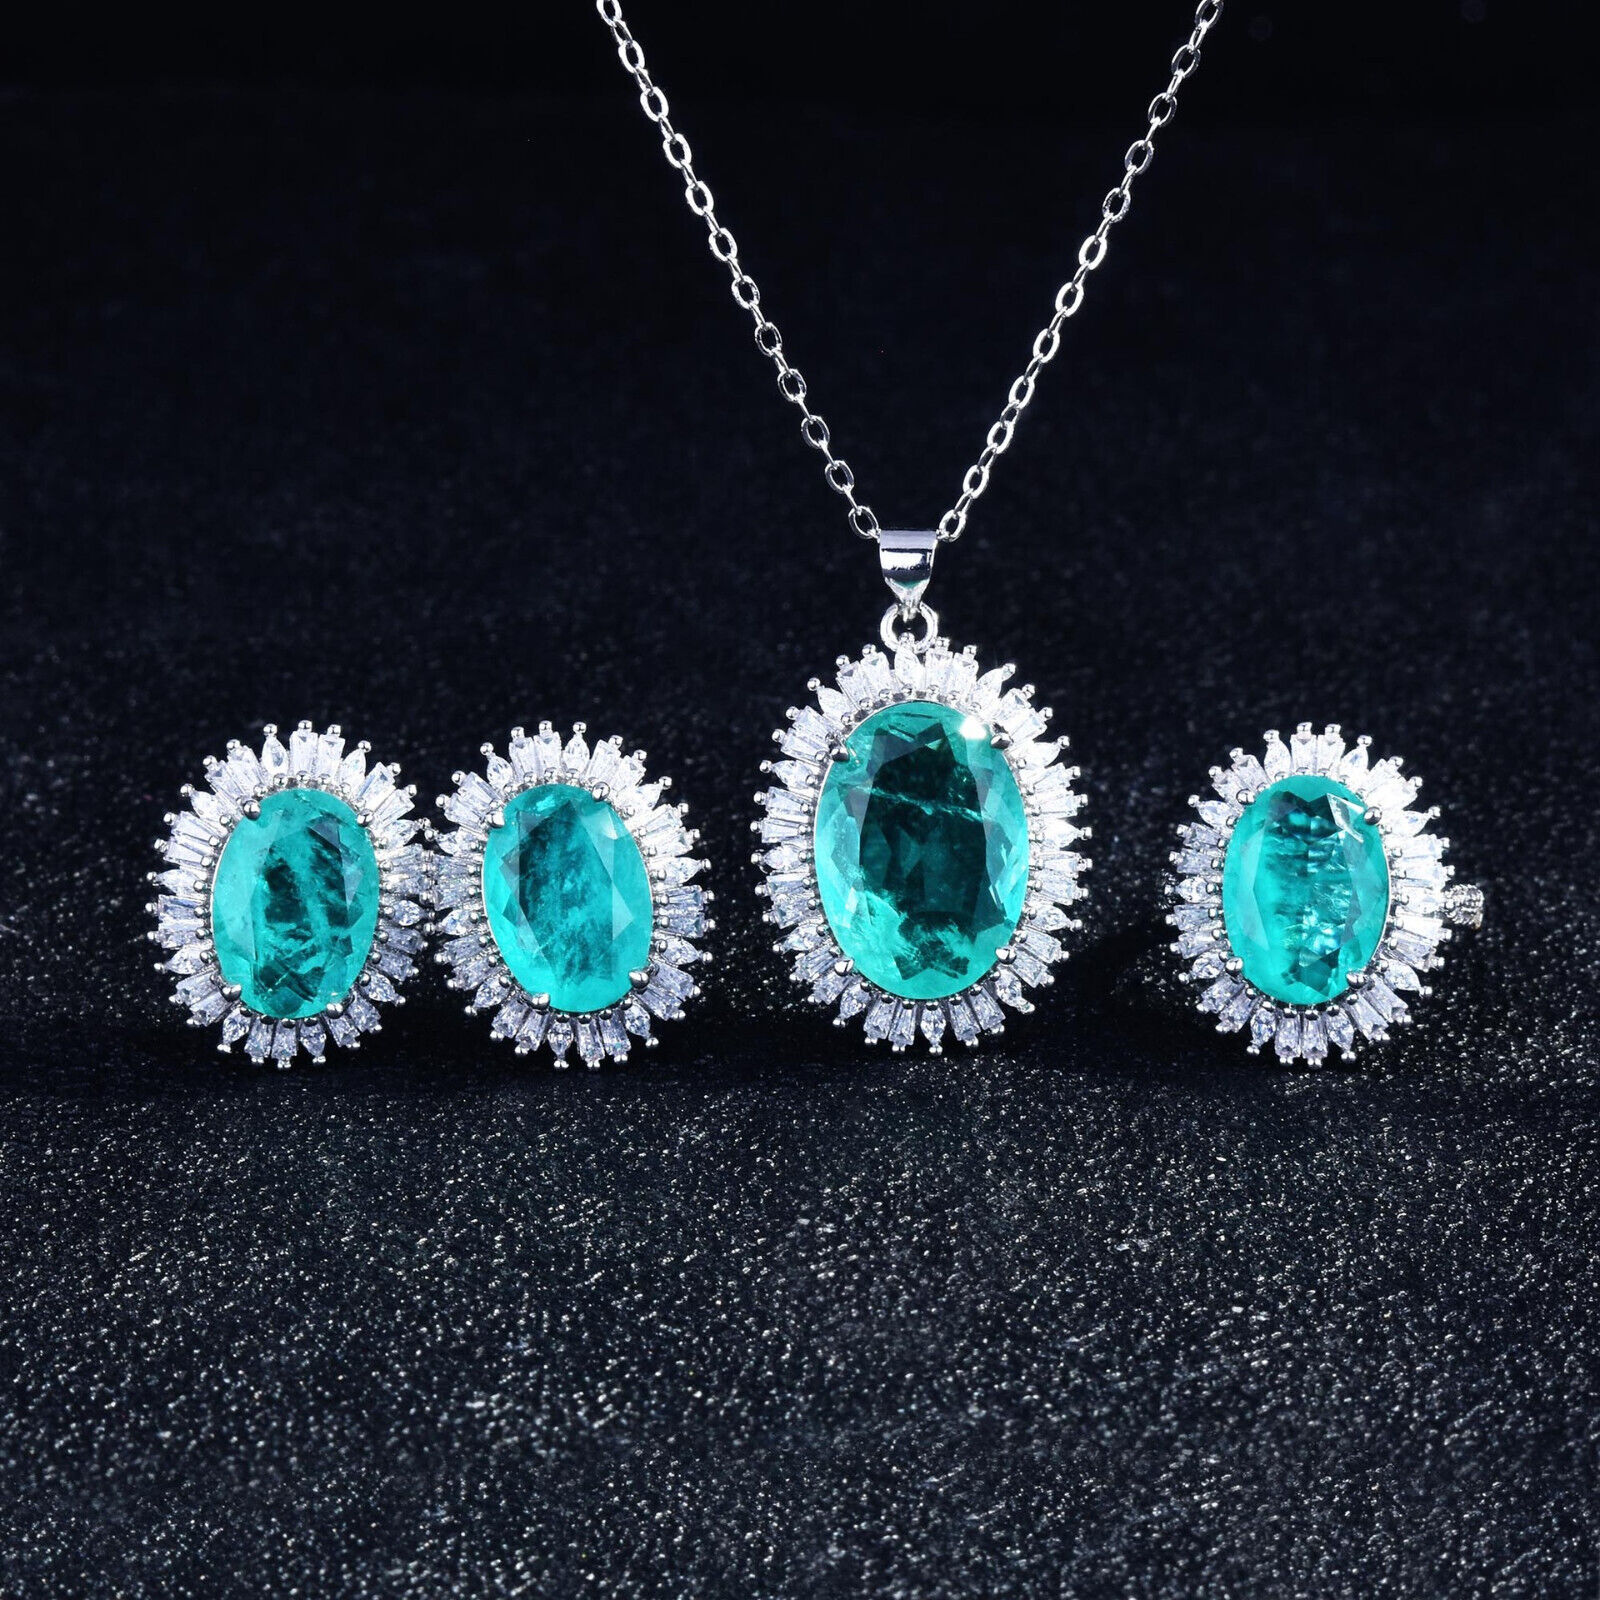 Charming 3pc Jewelry Set Neon Blue Tourmaline Gems Silver Women Earring Necklace Unbranded